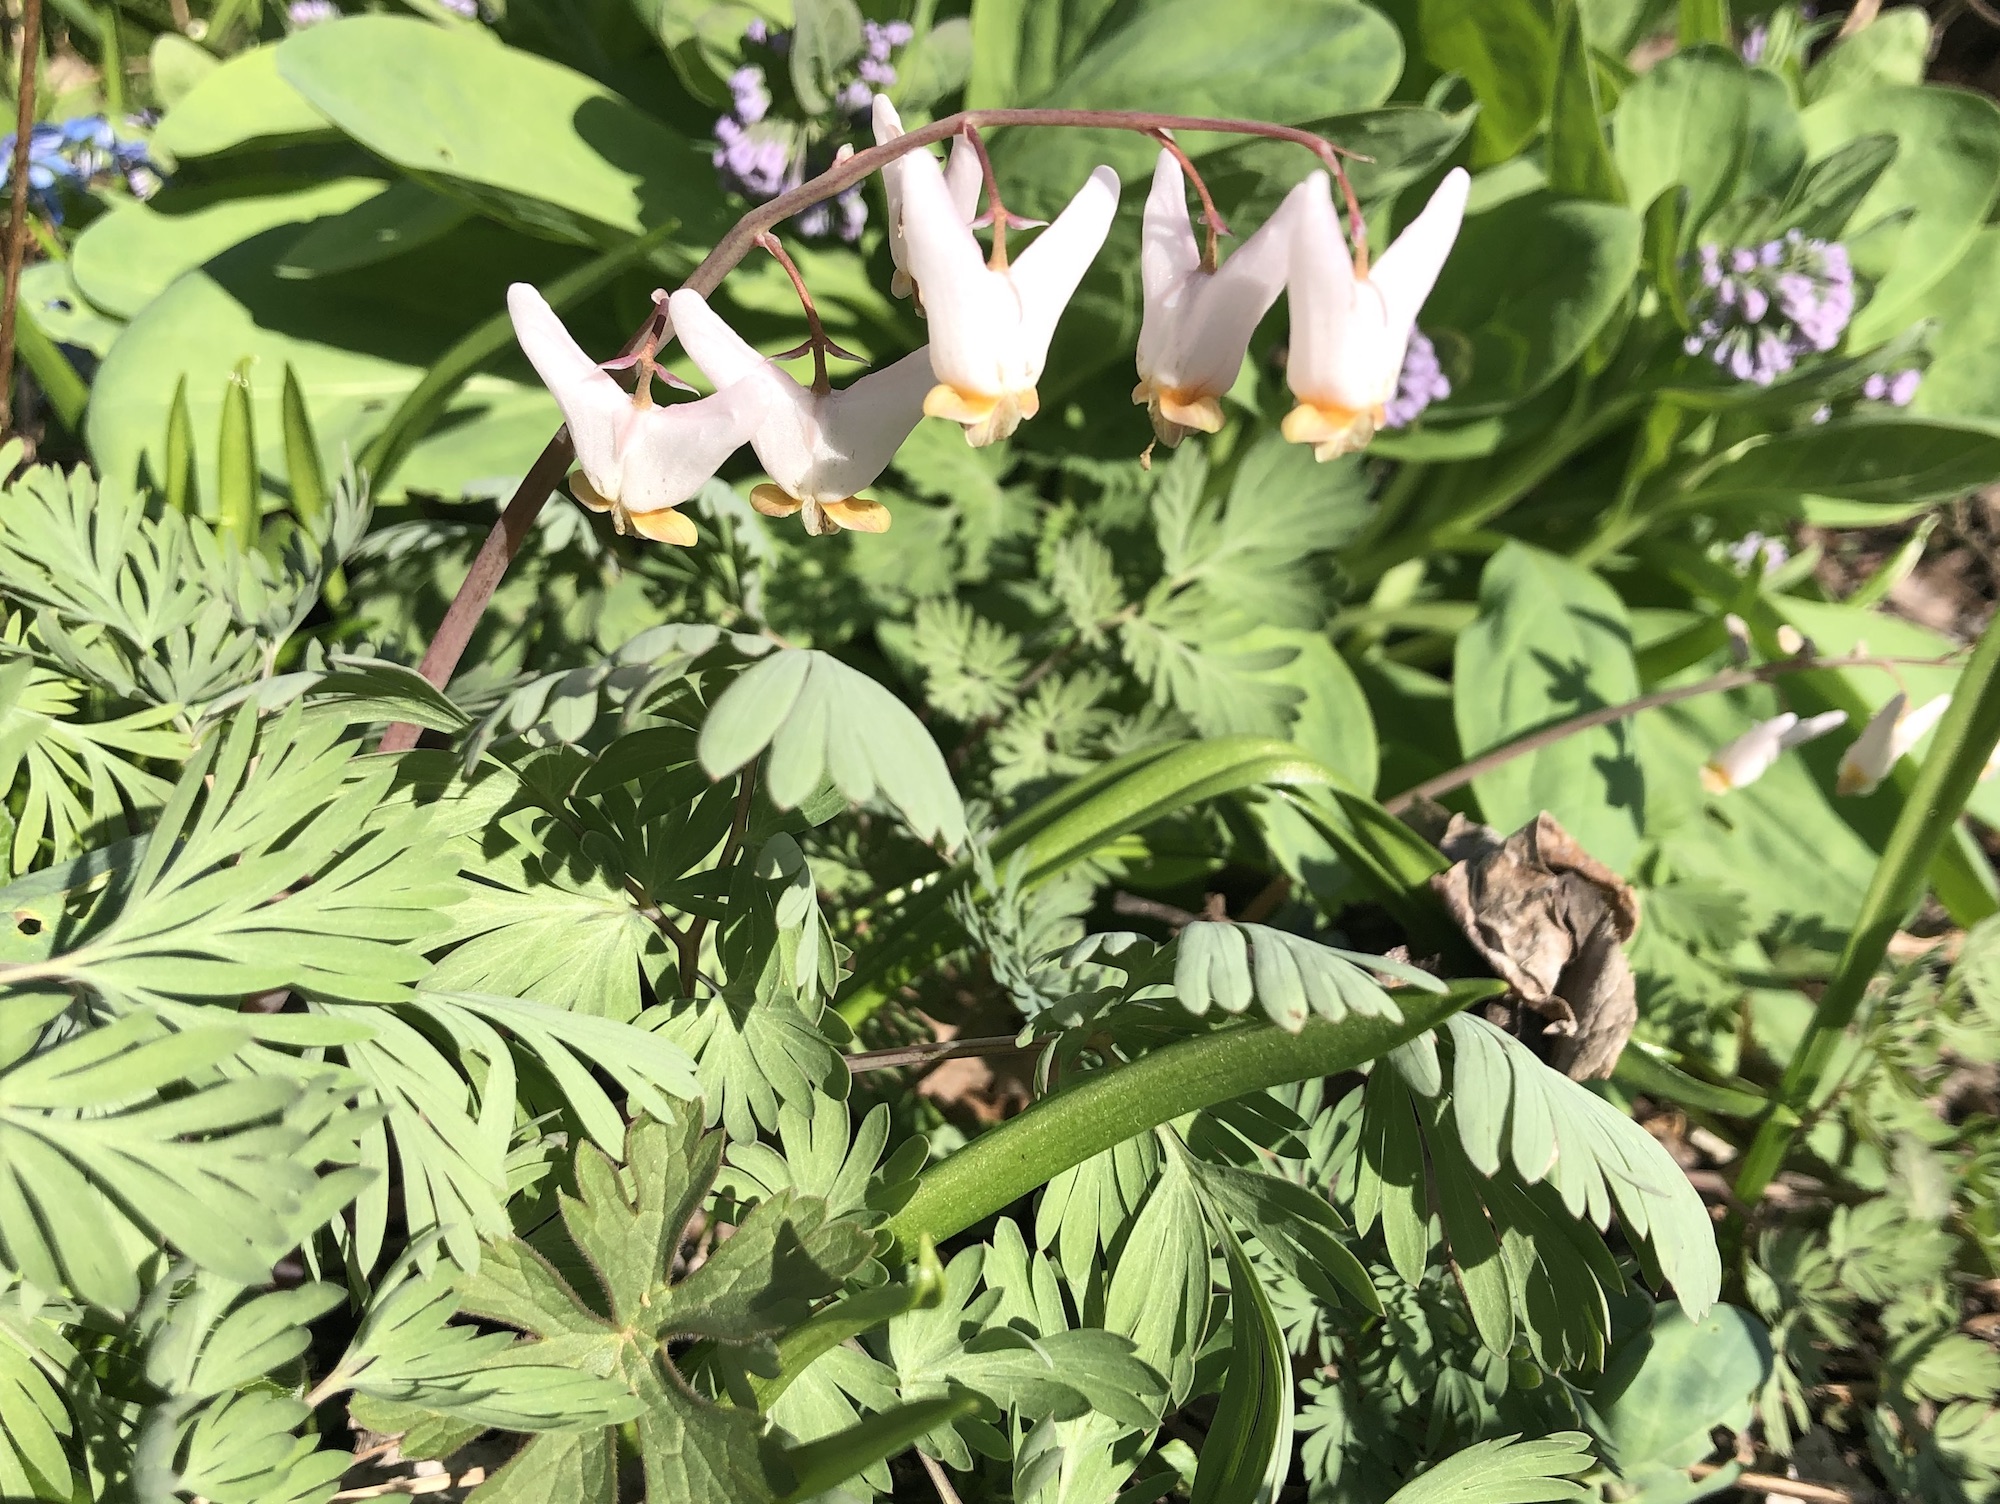 Dutchman's Breeches photo taken on April 21, 2019 in Madison, Wisconsin by Duck Pond